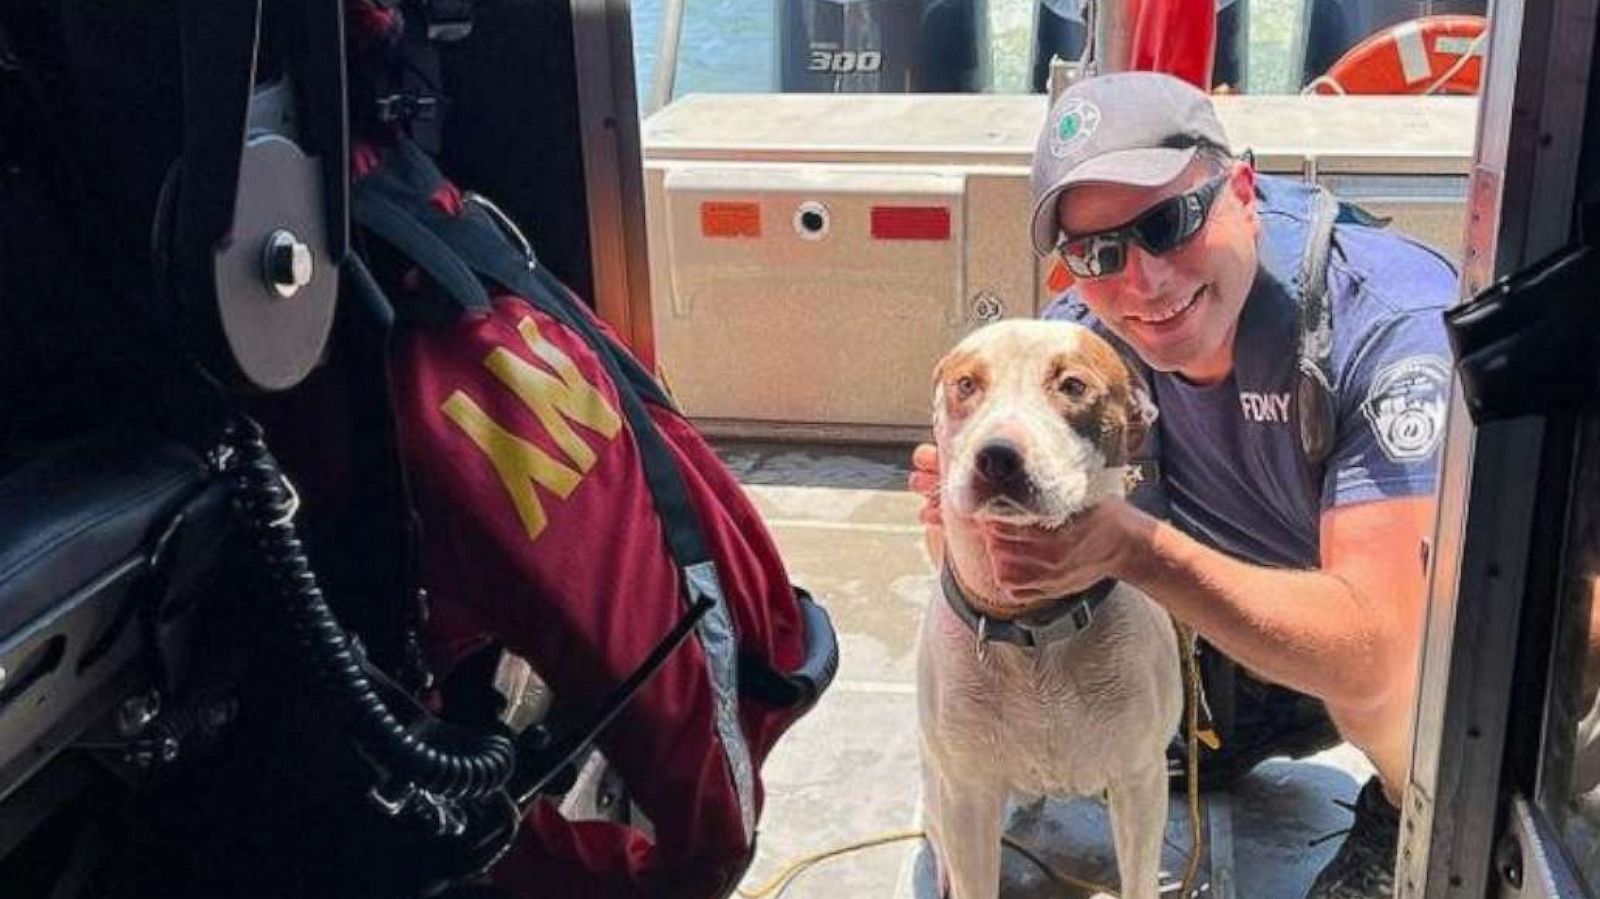 Dog rescued by authorities and good Samaritan after being thrown off bridge  into river - ABC News